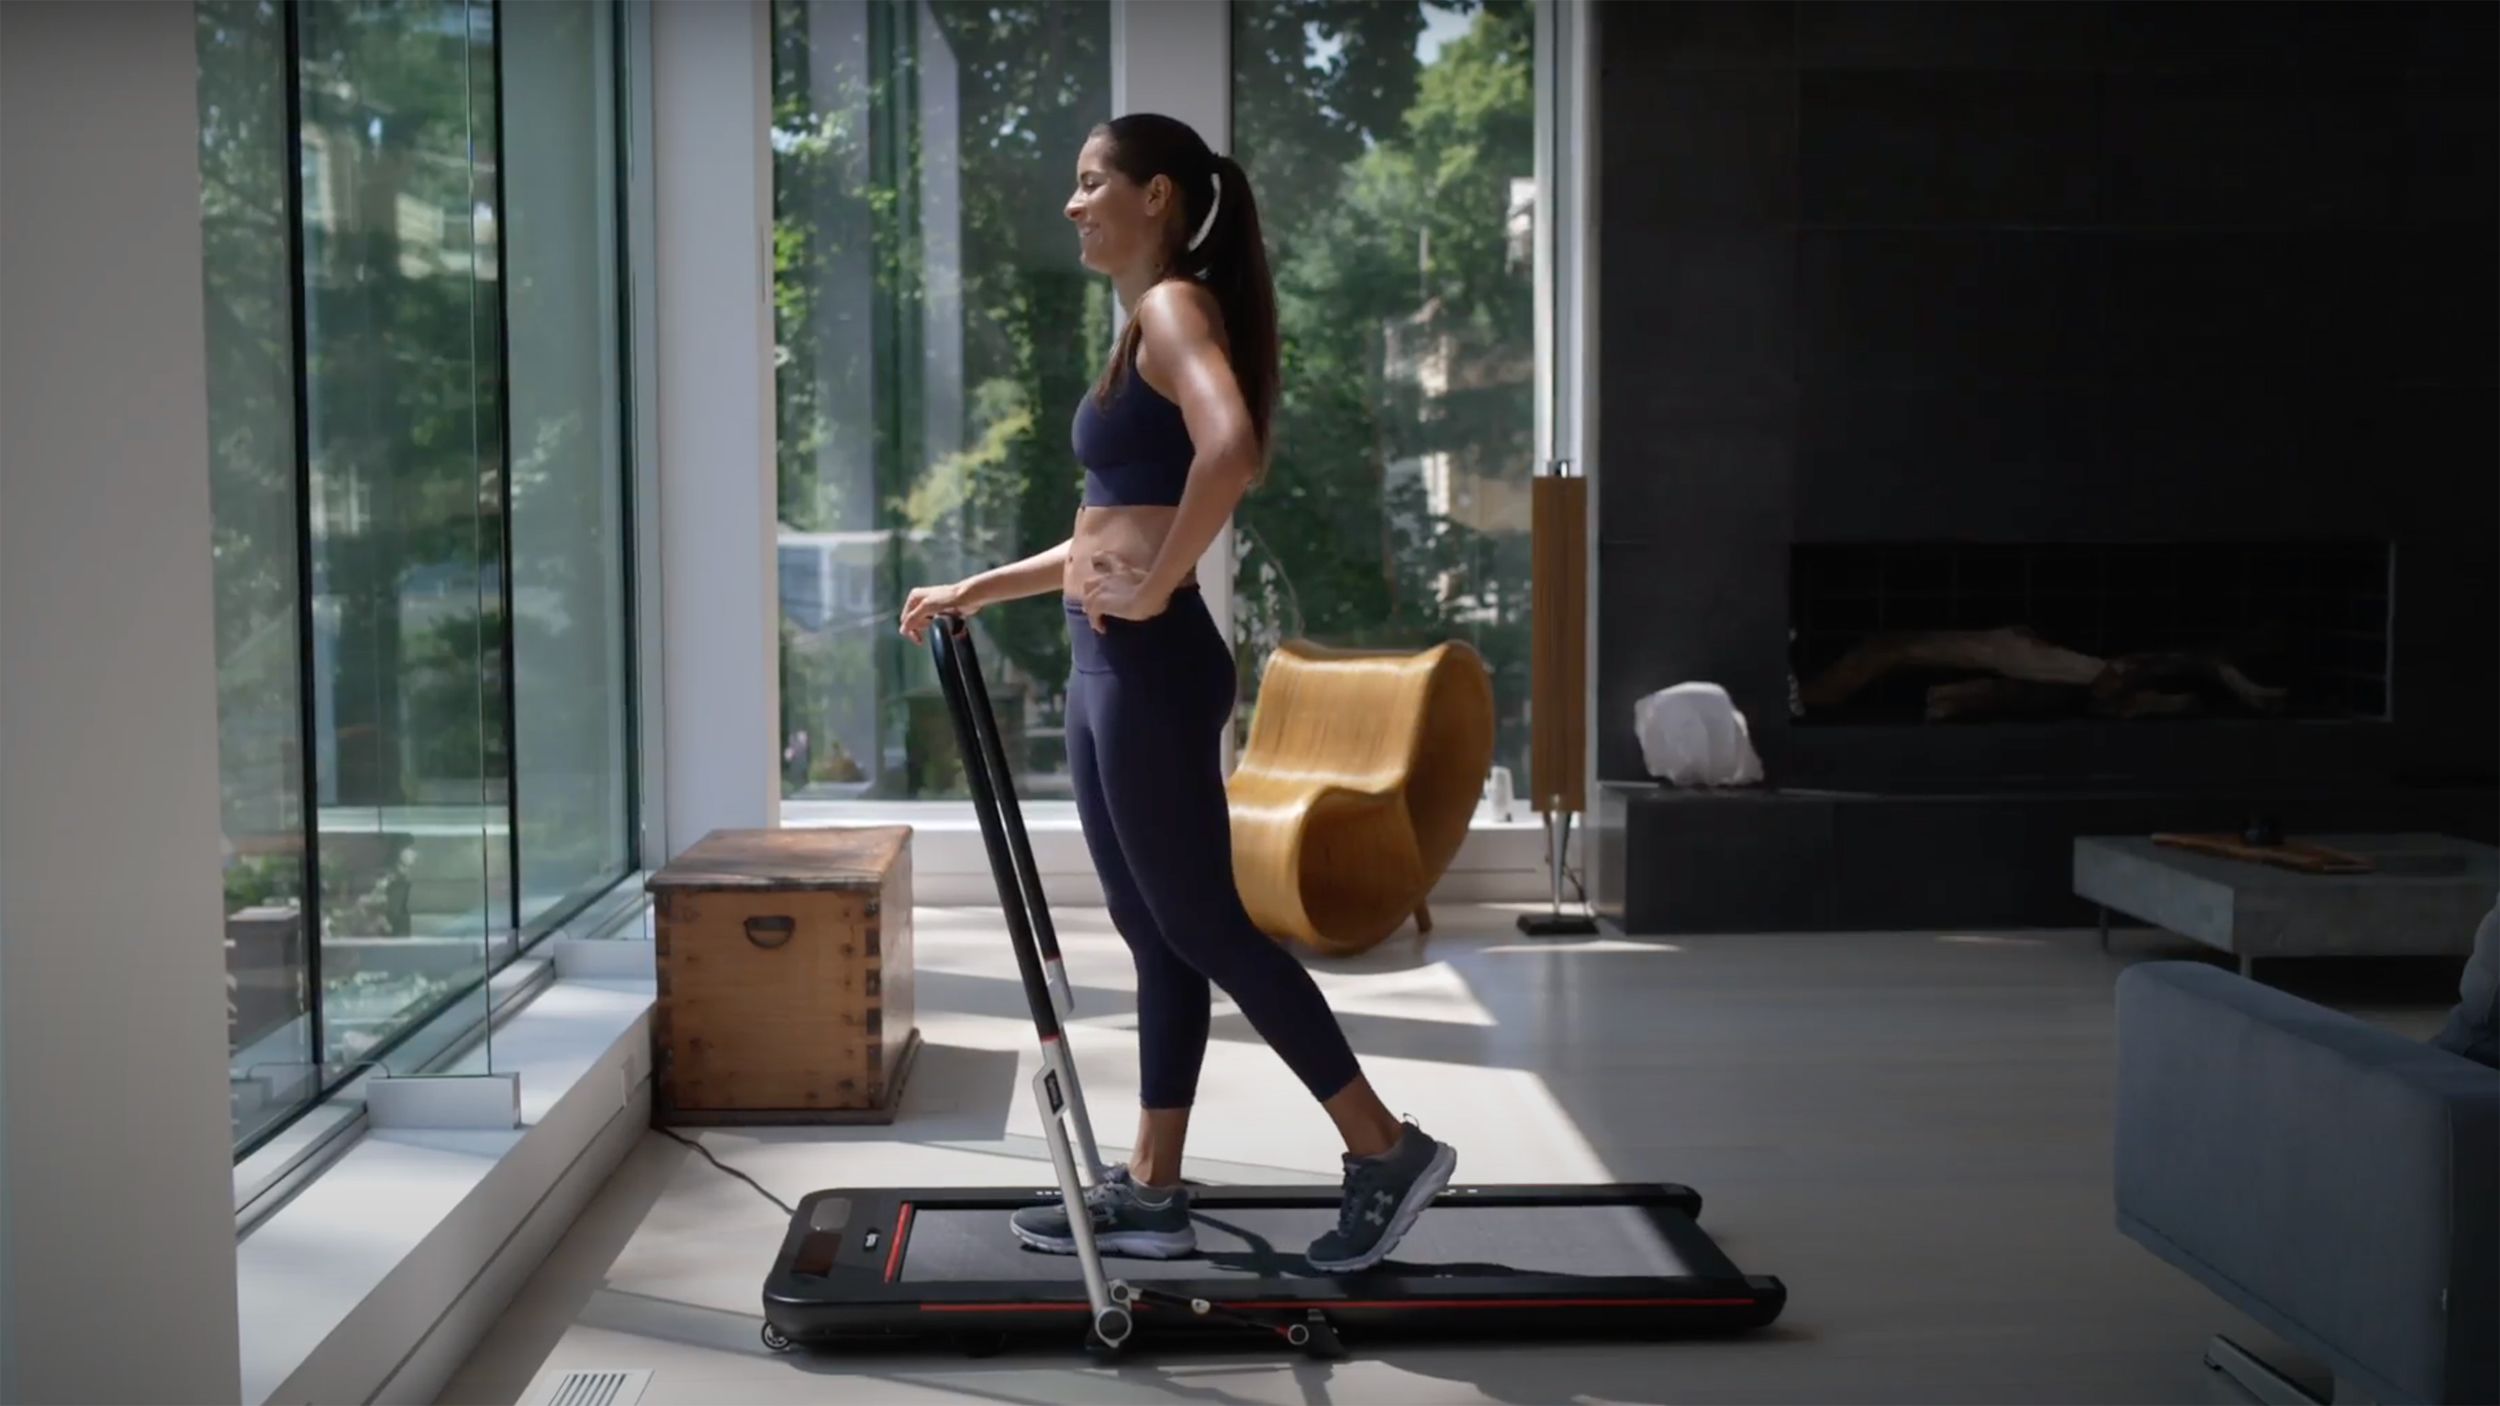 Treadly review: The foldable treadmill perfect for your home workouts | CNN Underscored